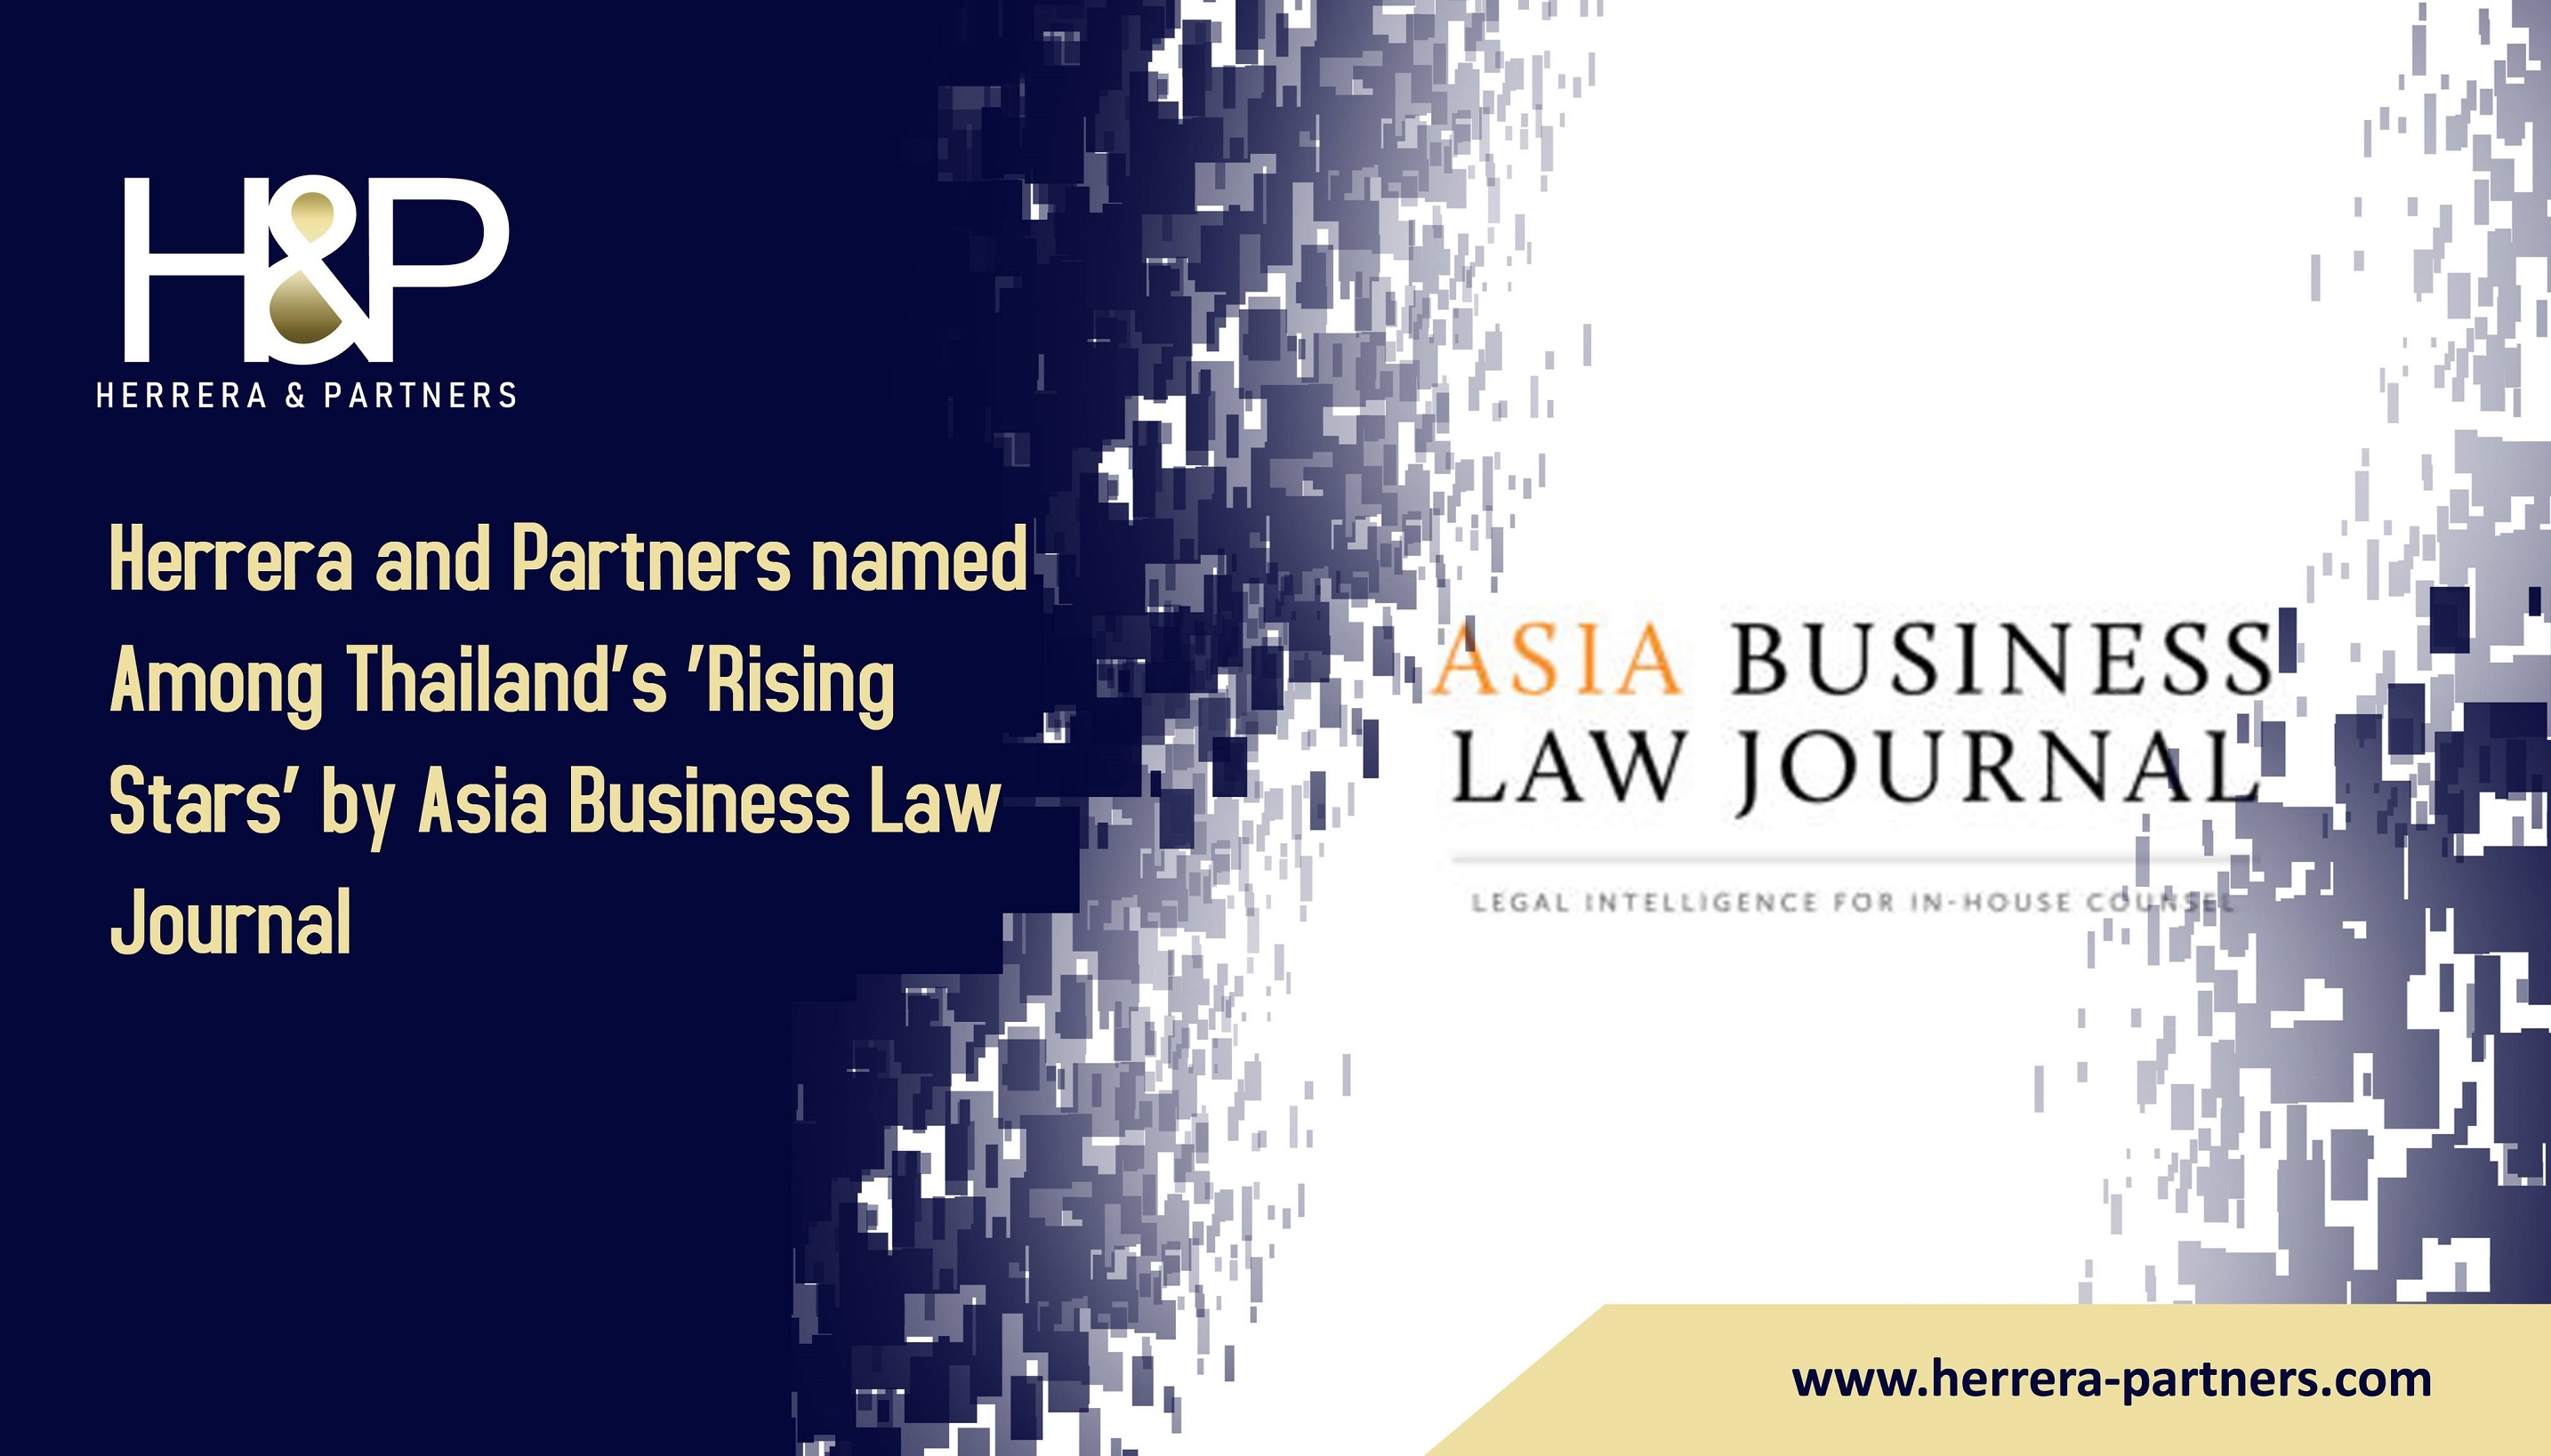 Herrera and Partners named Among Thailand’s ‘Rising Stars’ by Asia Business Law Journal